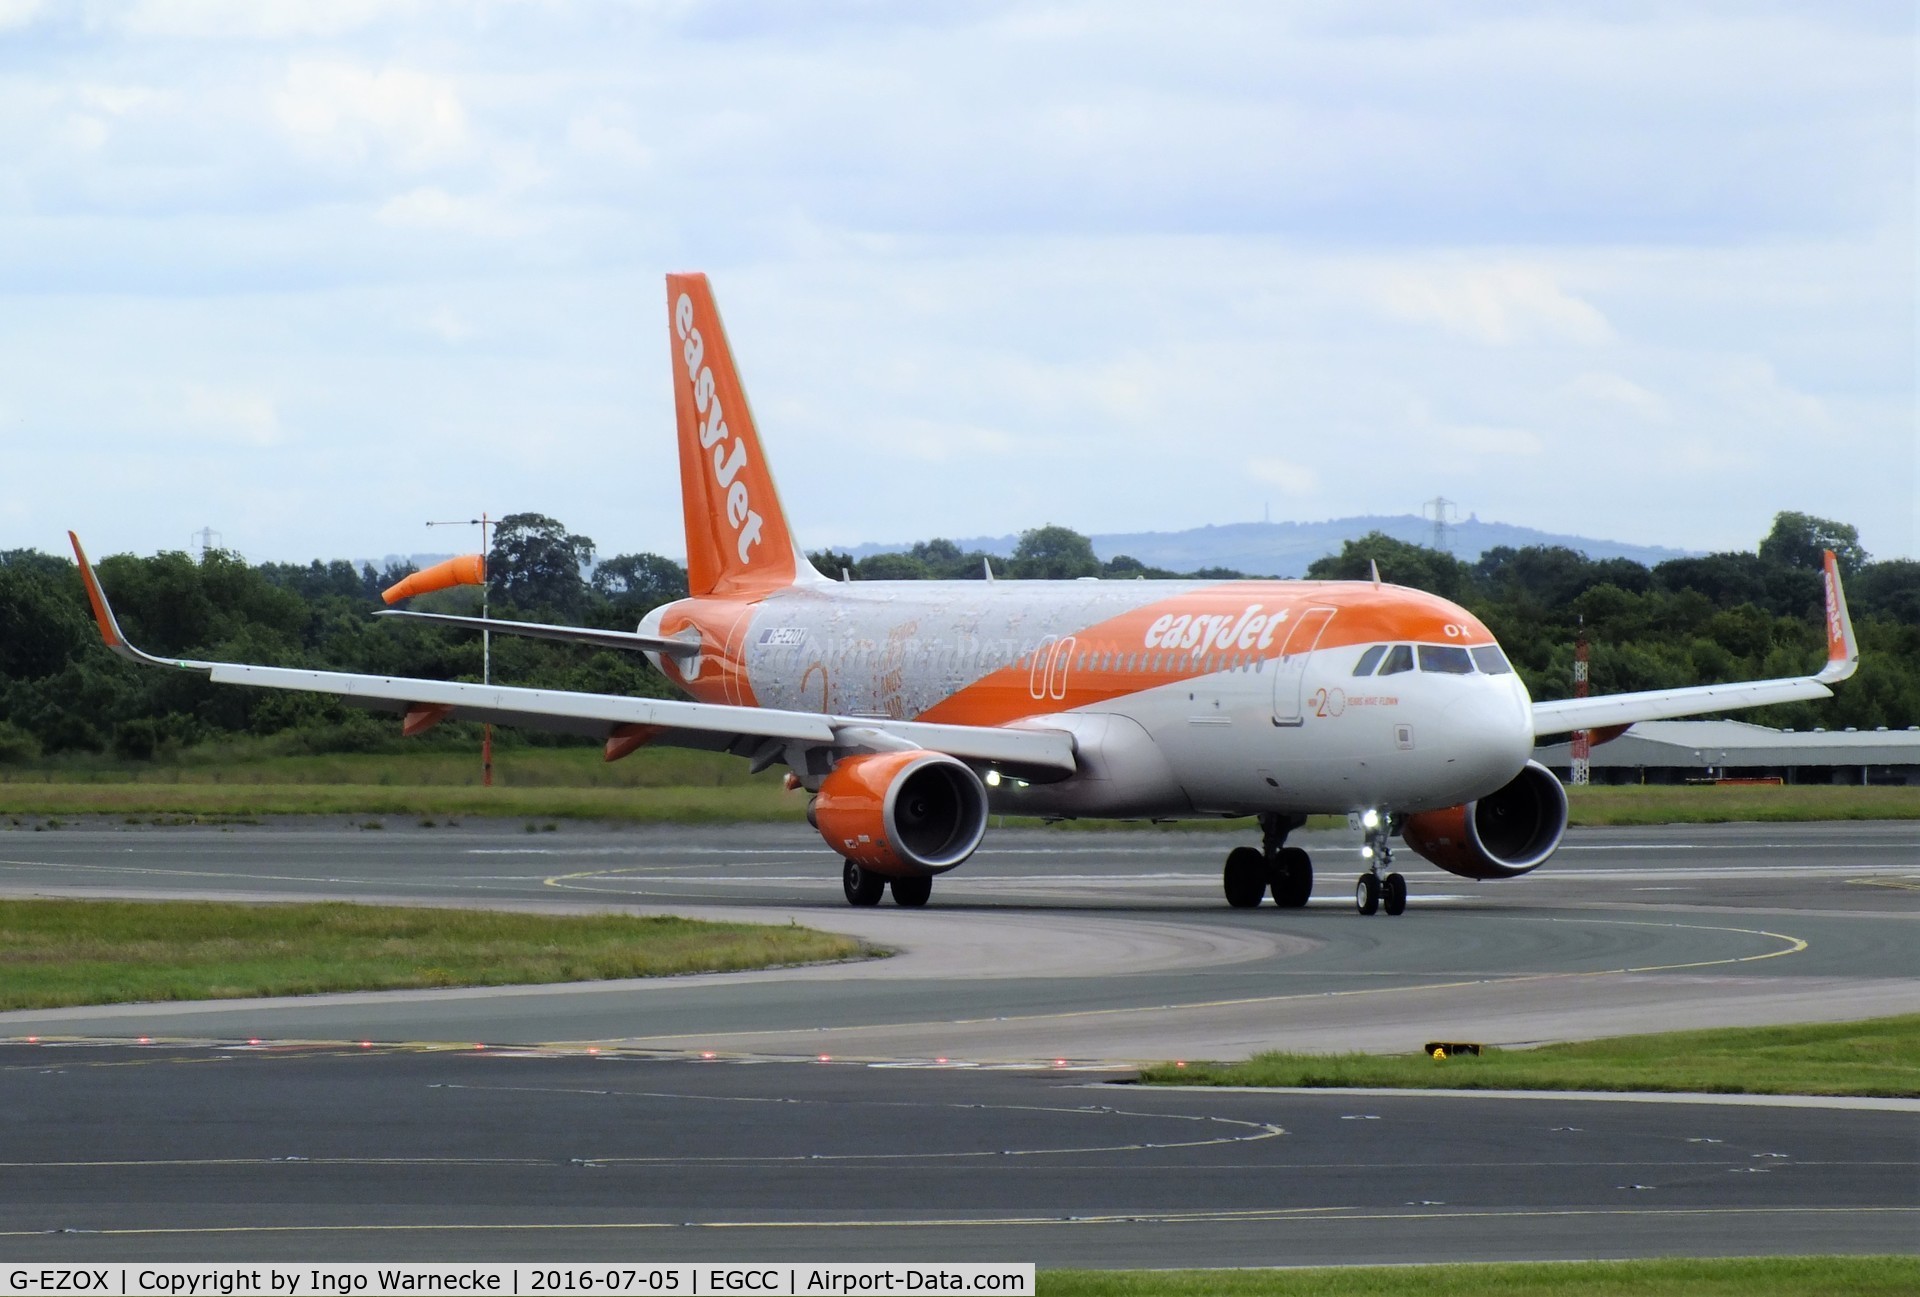 G-EZOX, 2015 Airbus A320-214 C/N 6837, Airbus A320-214 of easyJet in special '20 years jubilee' colours at Manchester airport